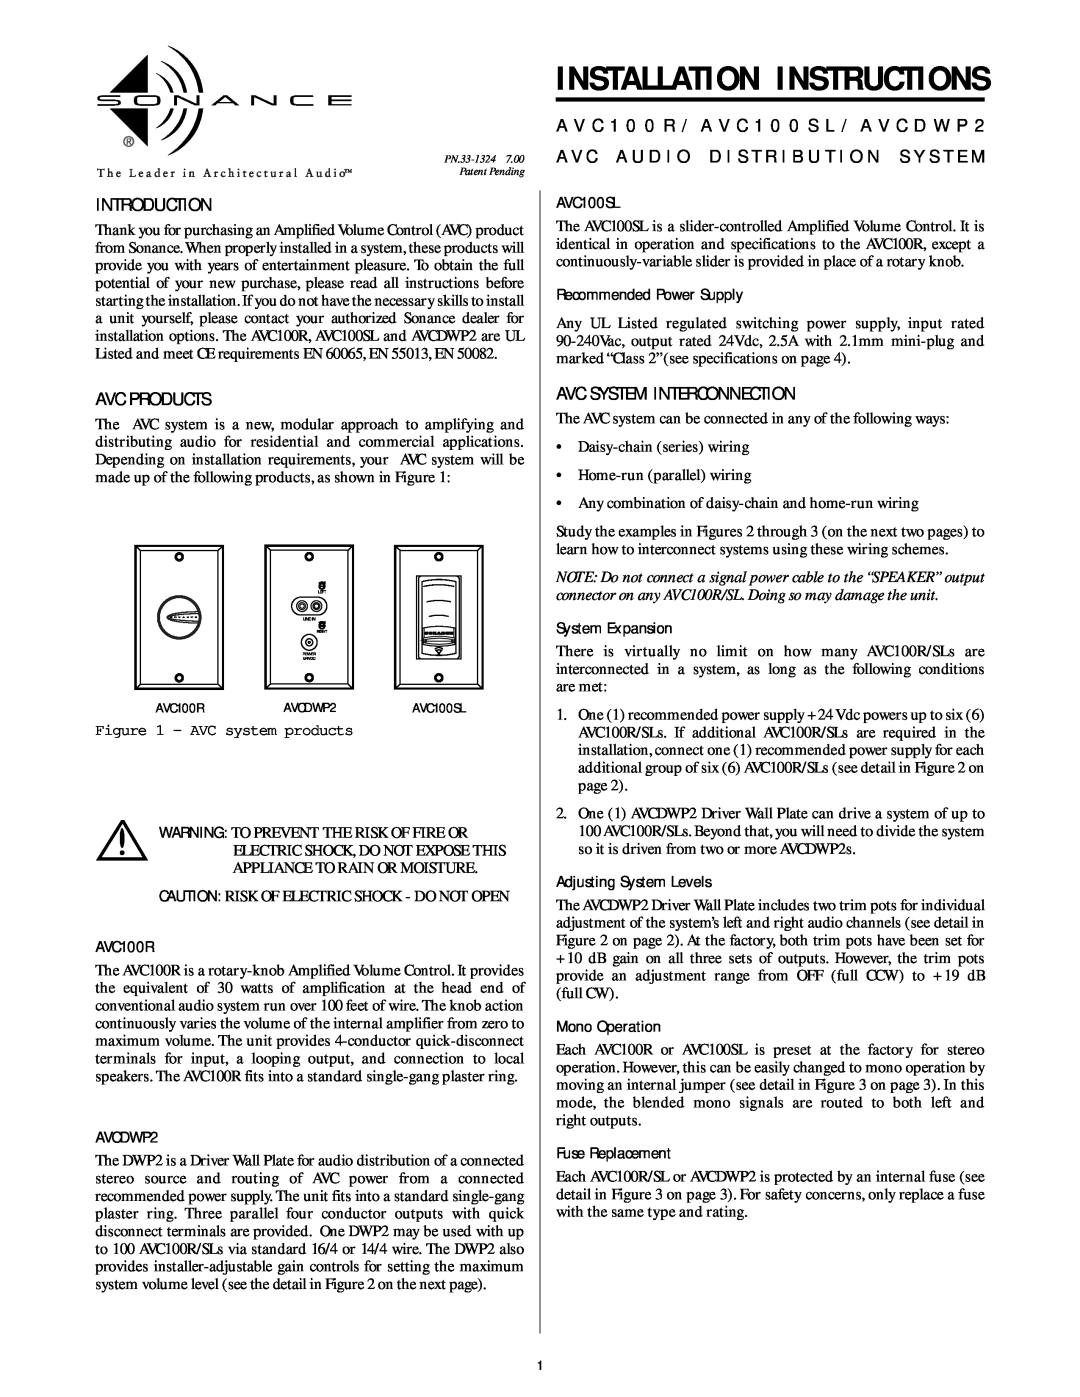 Sonance AVC100SL installation instructions Introduction, Avc Products, Avc System Interconnection, System Expansion 